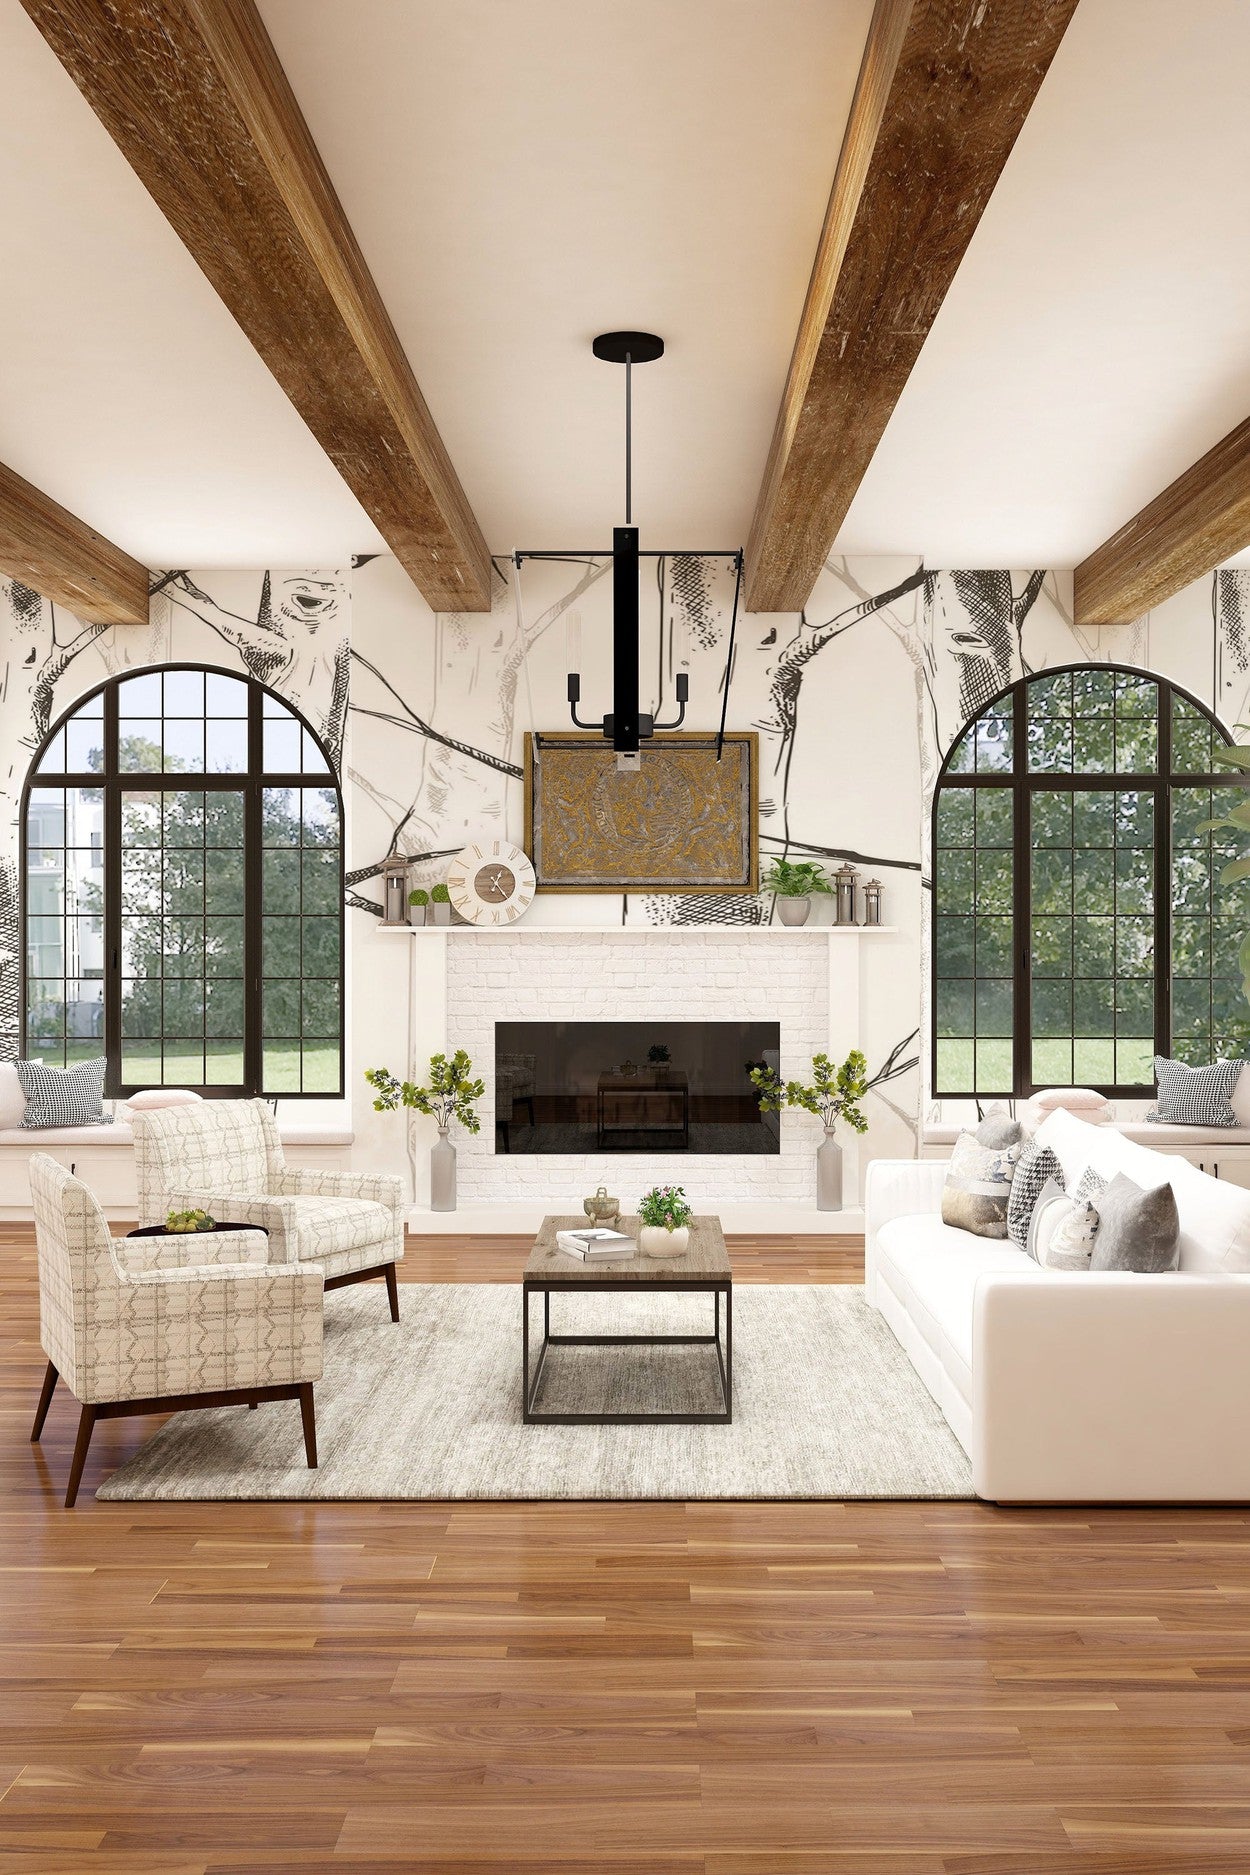 Elegant living room interior with floral wall mural, exposed beams, and stylish furniture